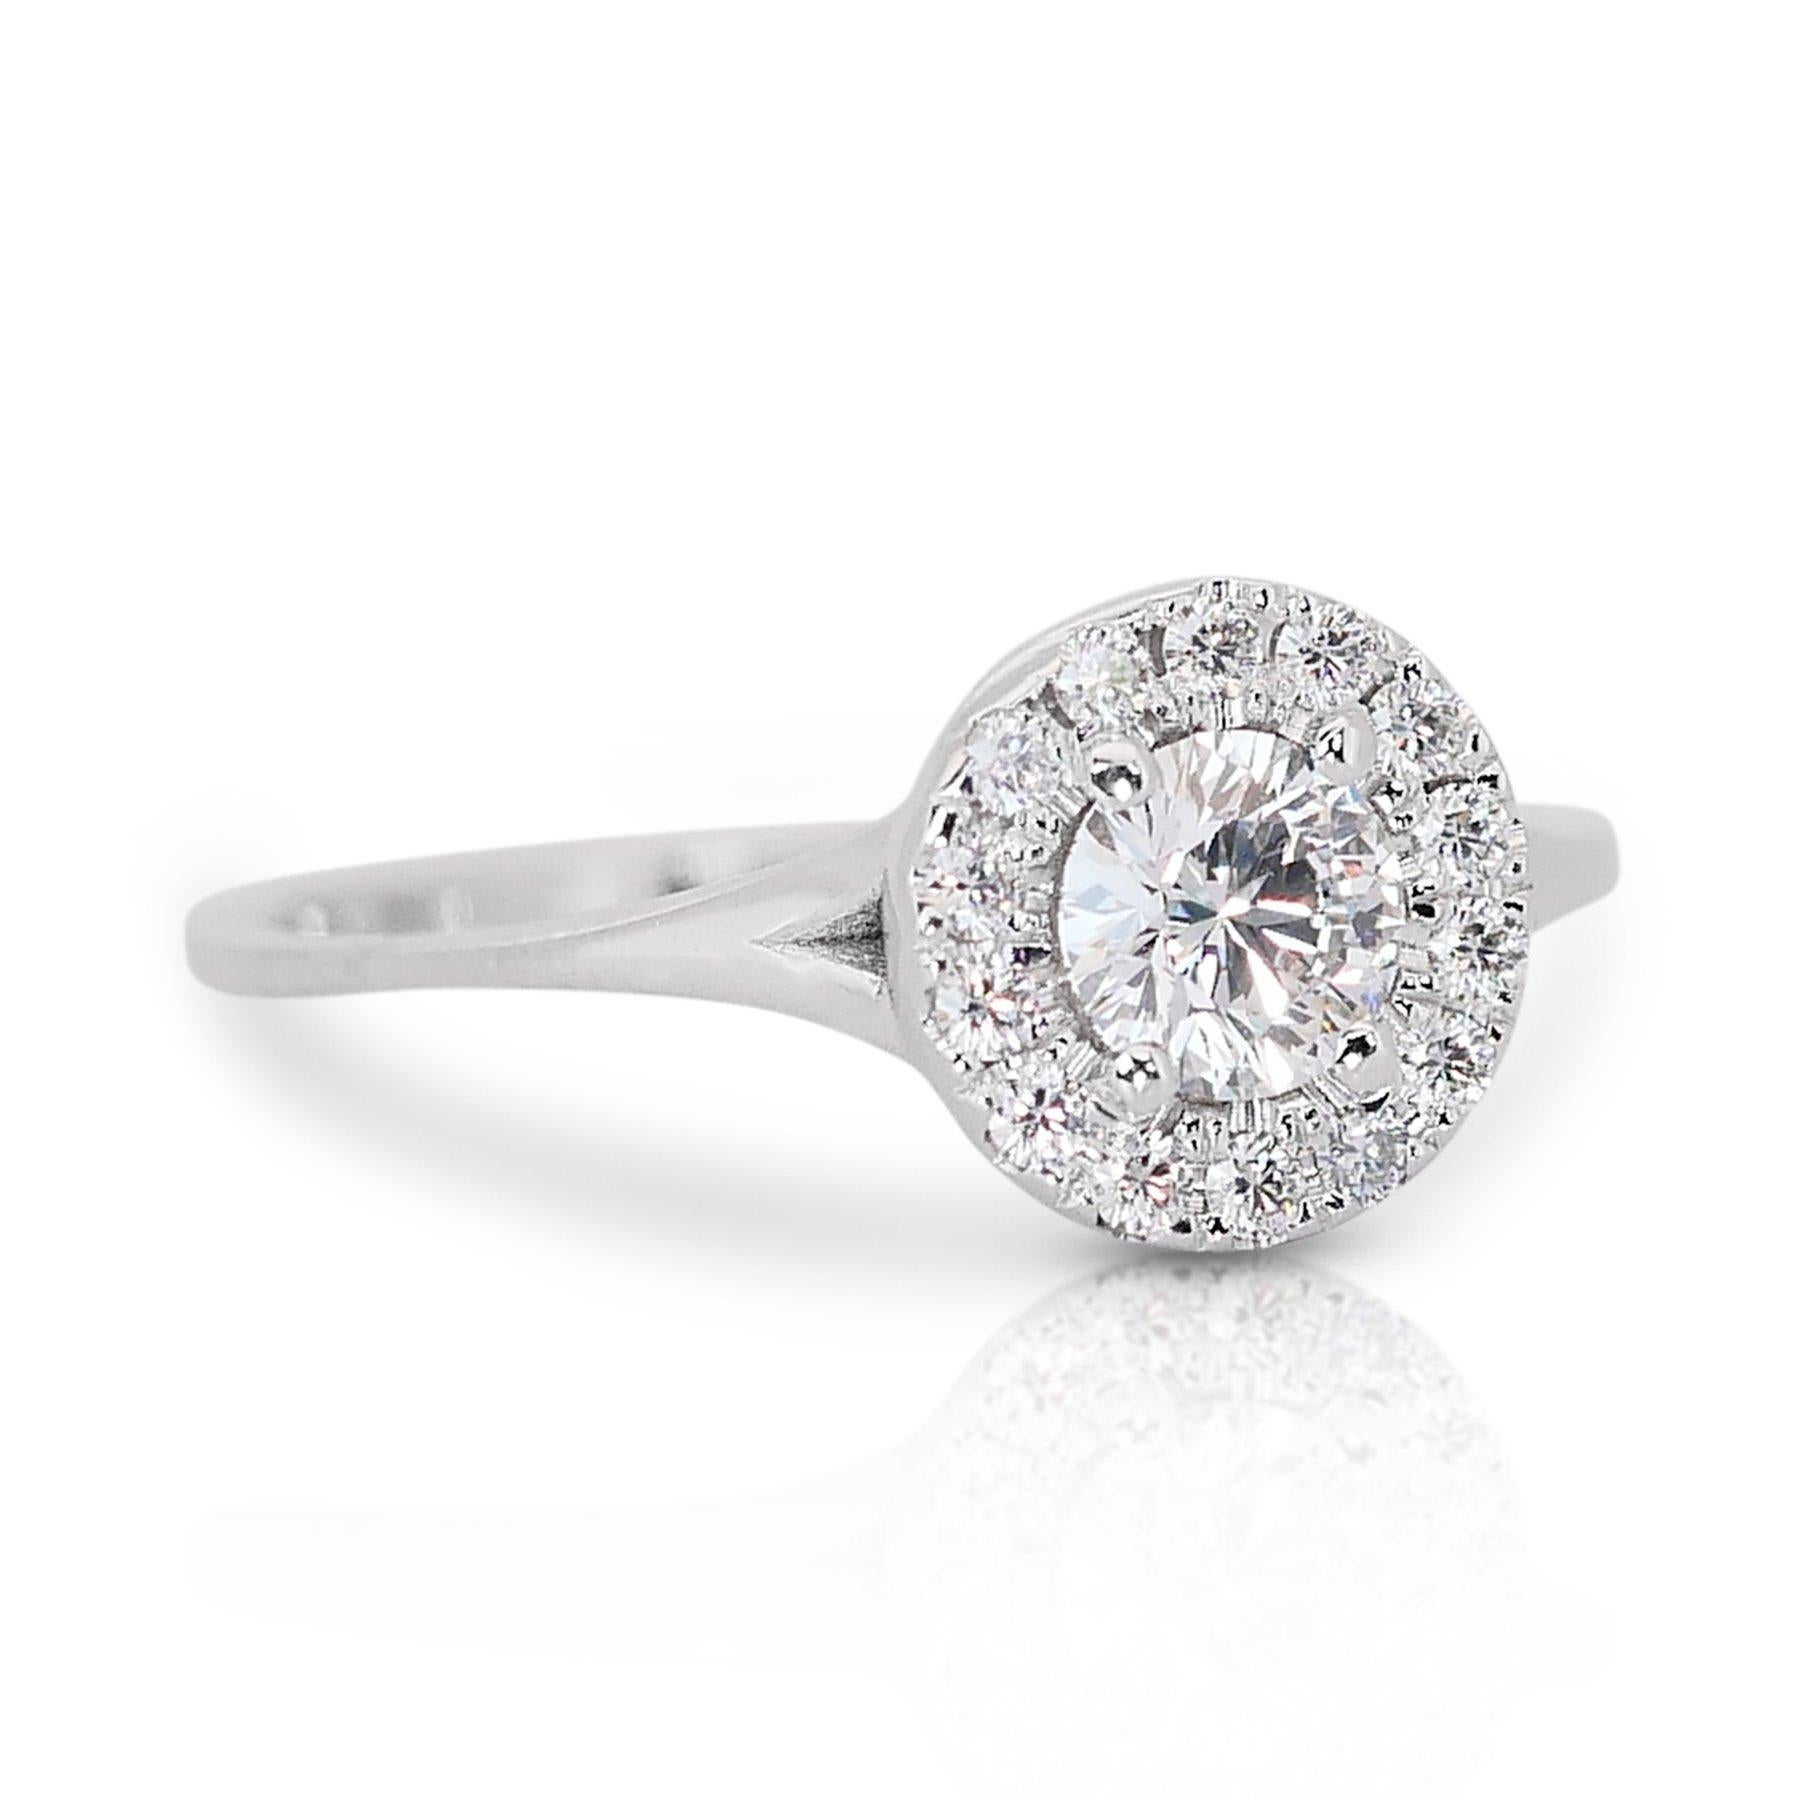 18k Classic Ring with 0.43ct Round Modified Diamond - GIA Certified

A testament to sophistication and refined beauty. The centerpiece of this halo ring is a brilliant 0.43-carat Round Modified Diamond, meticulously cut to enhance its sparkle. It